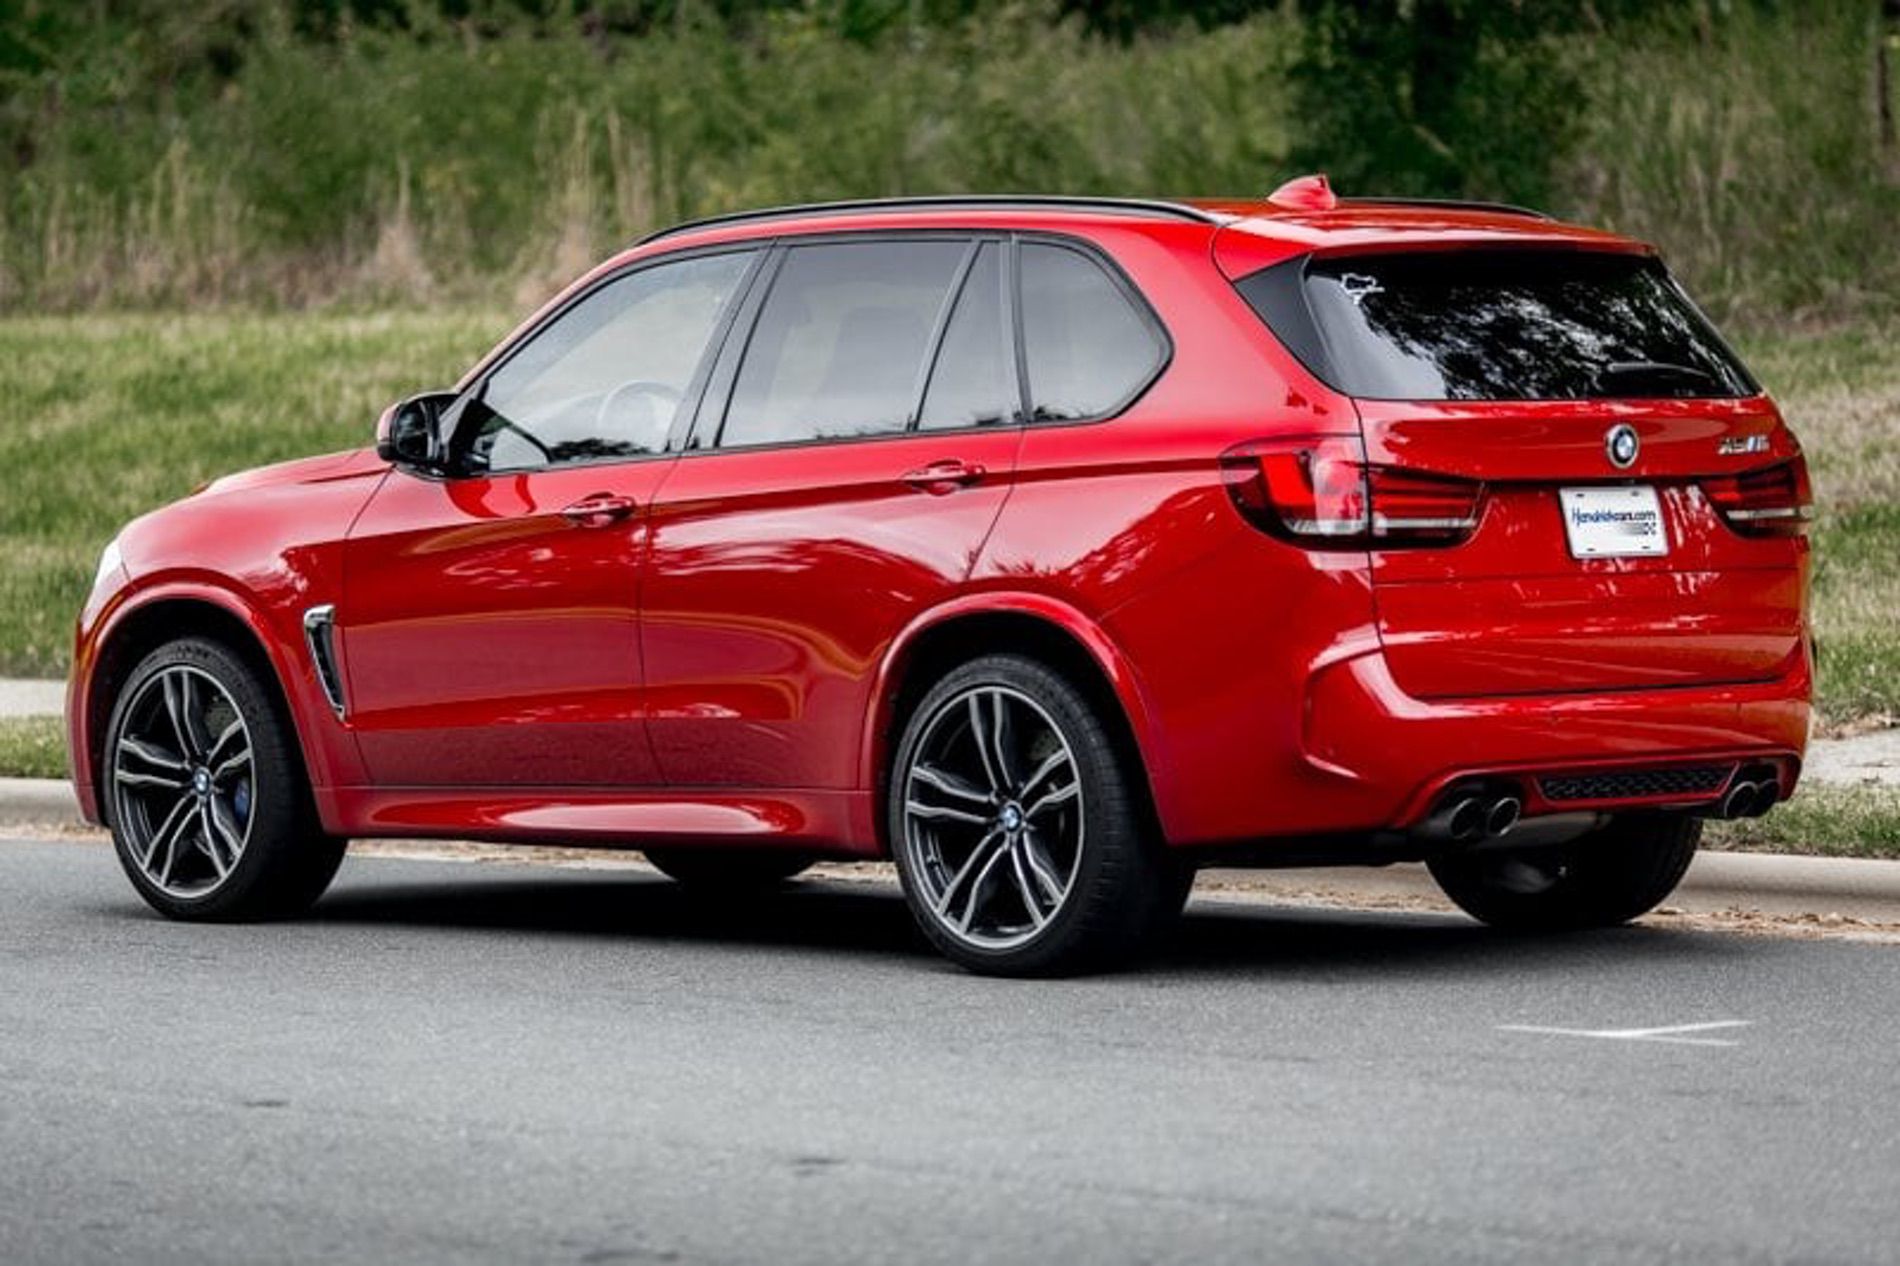 Stunning 2016 BMW X5 M in Melbourne Red Metallic is up for sale | i NEW